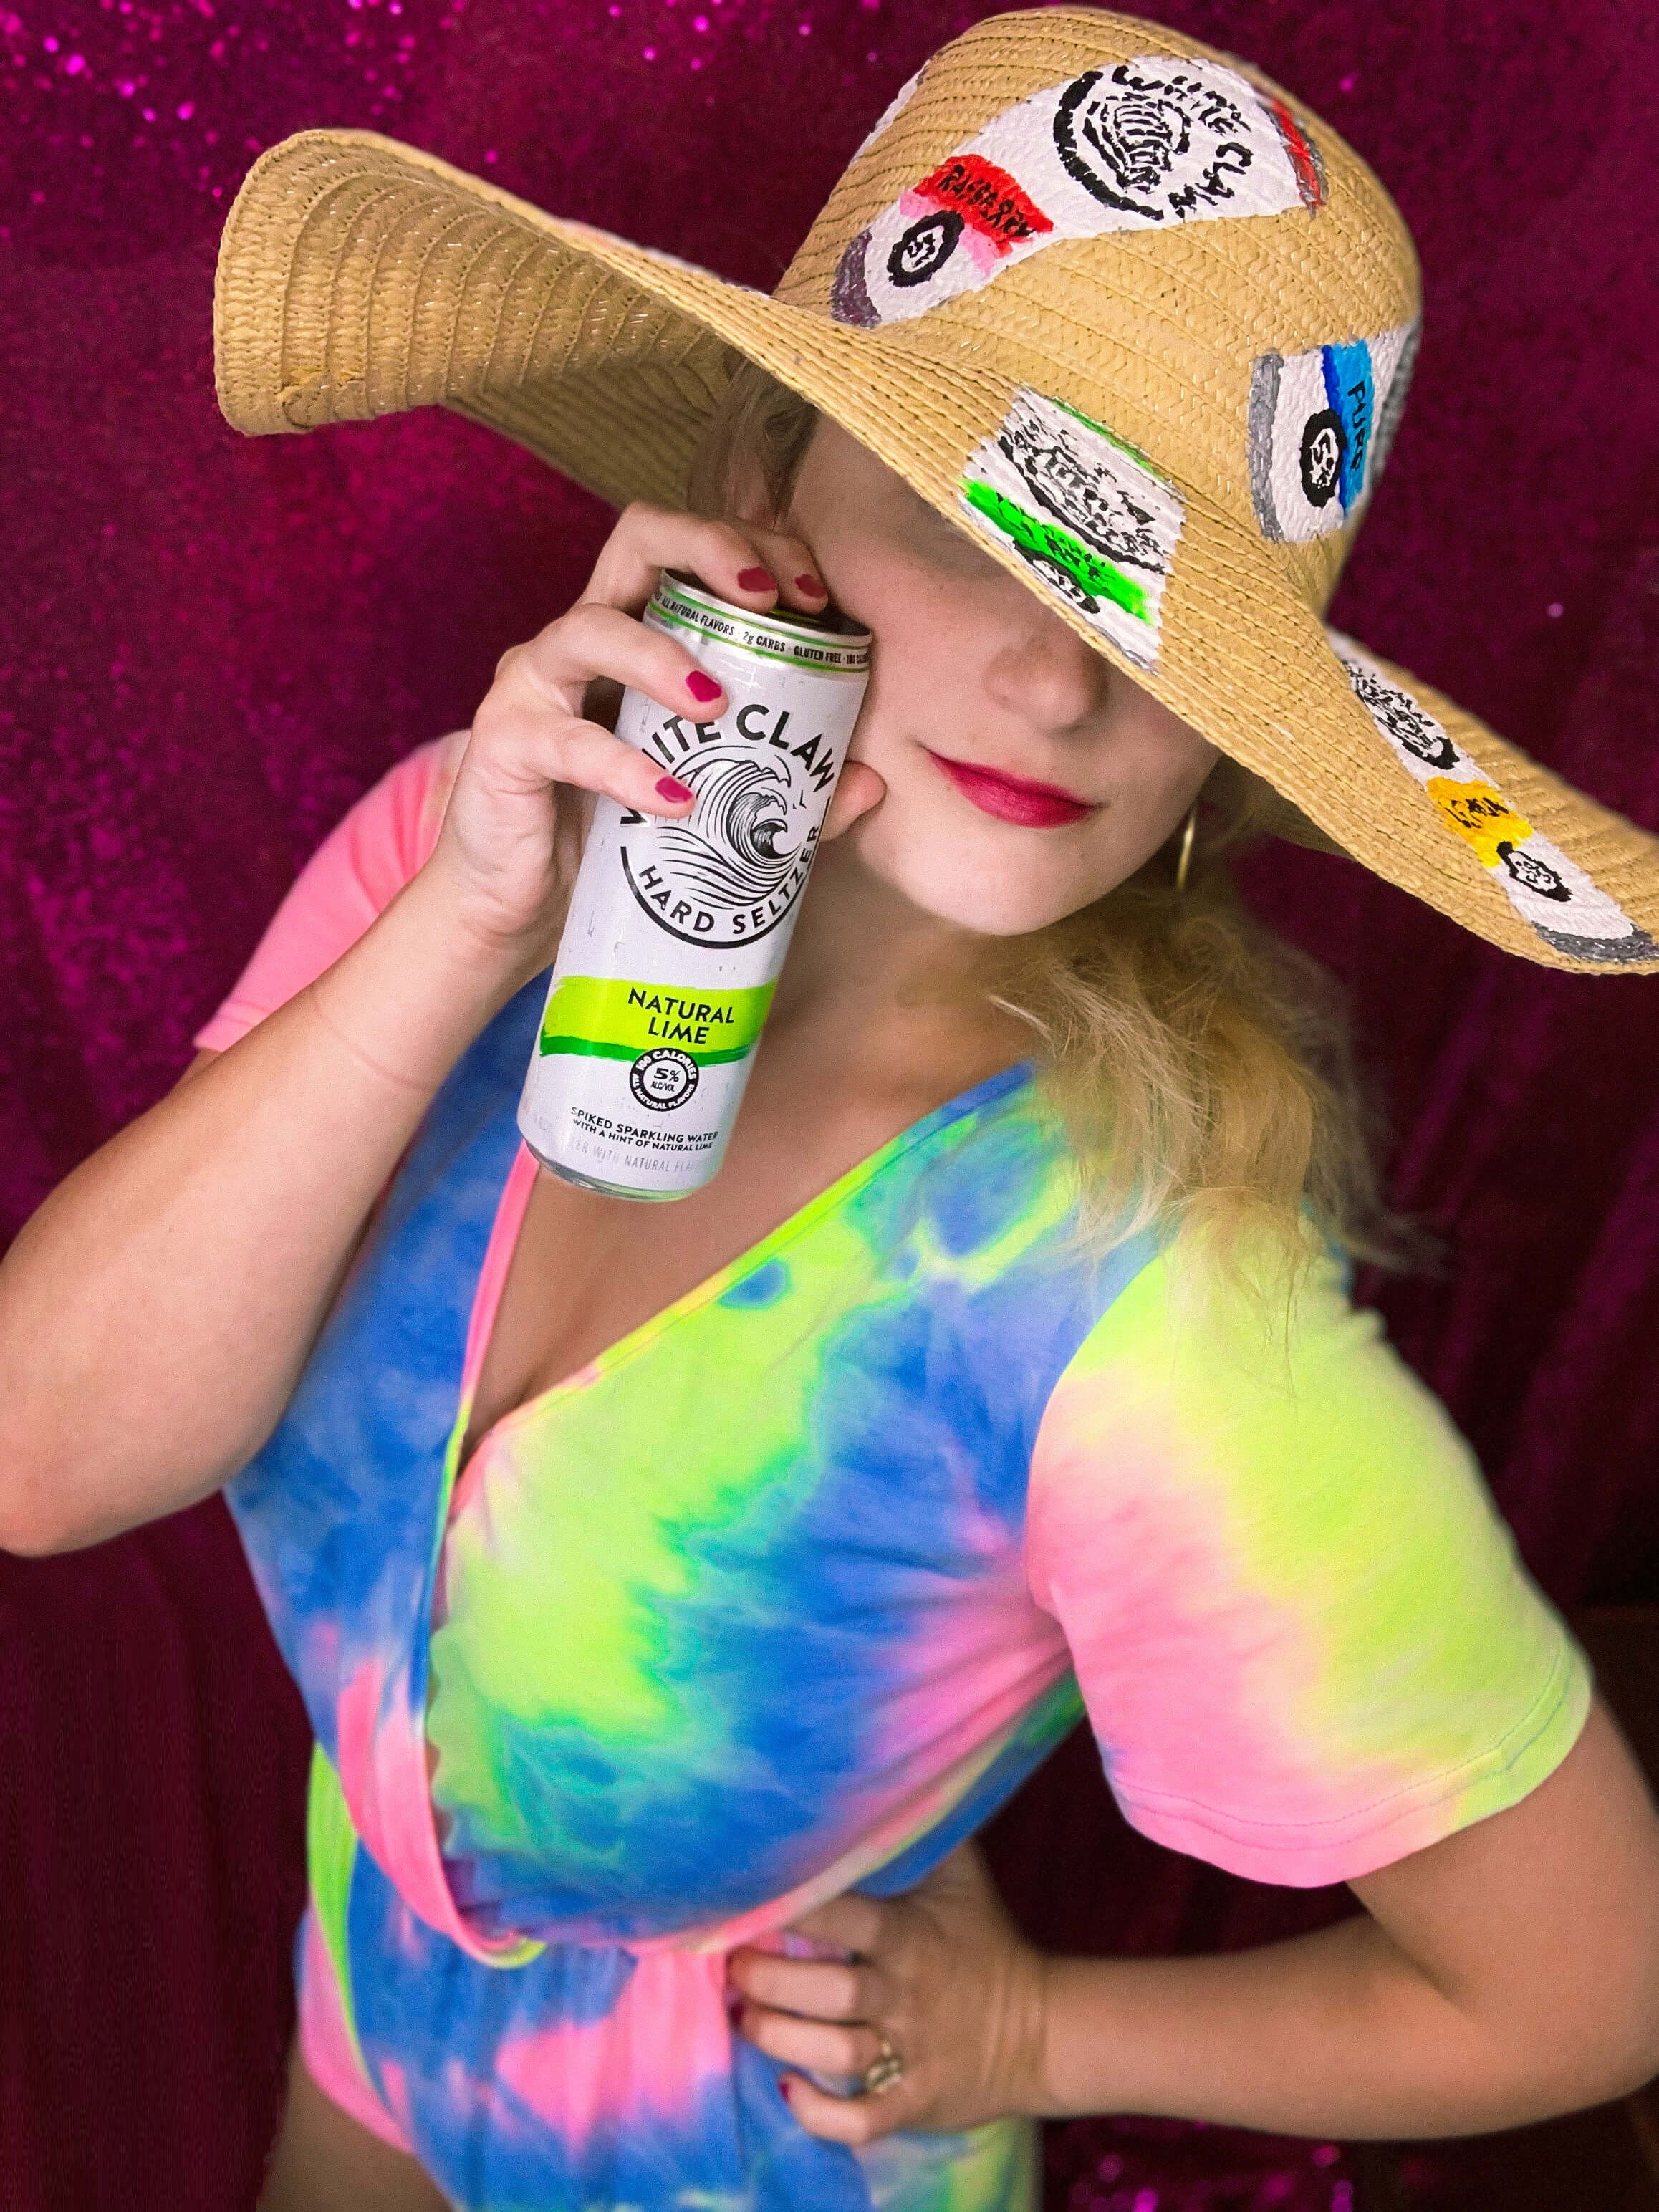 White Claw Floppy Hat - Crowned By Ellie